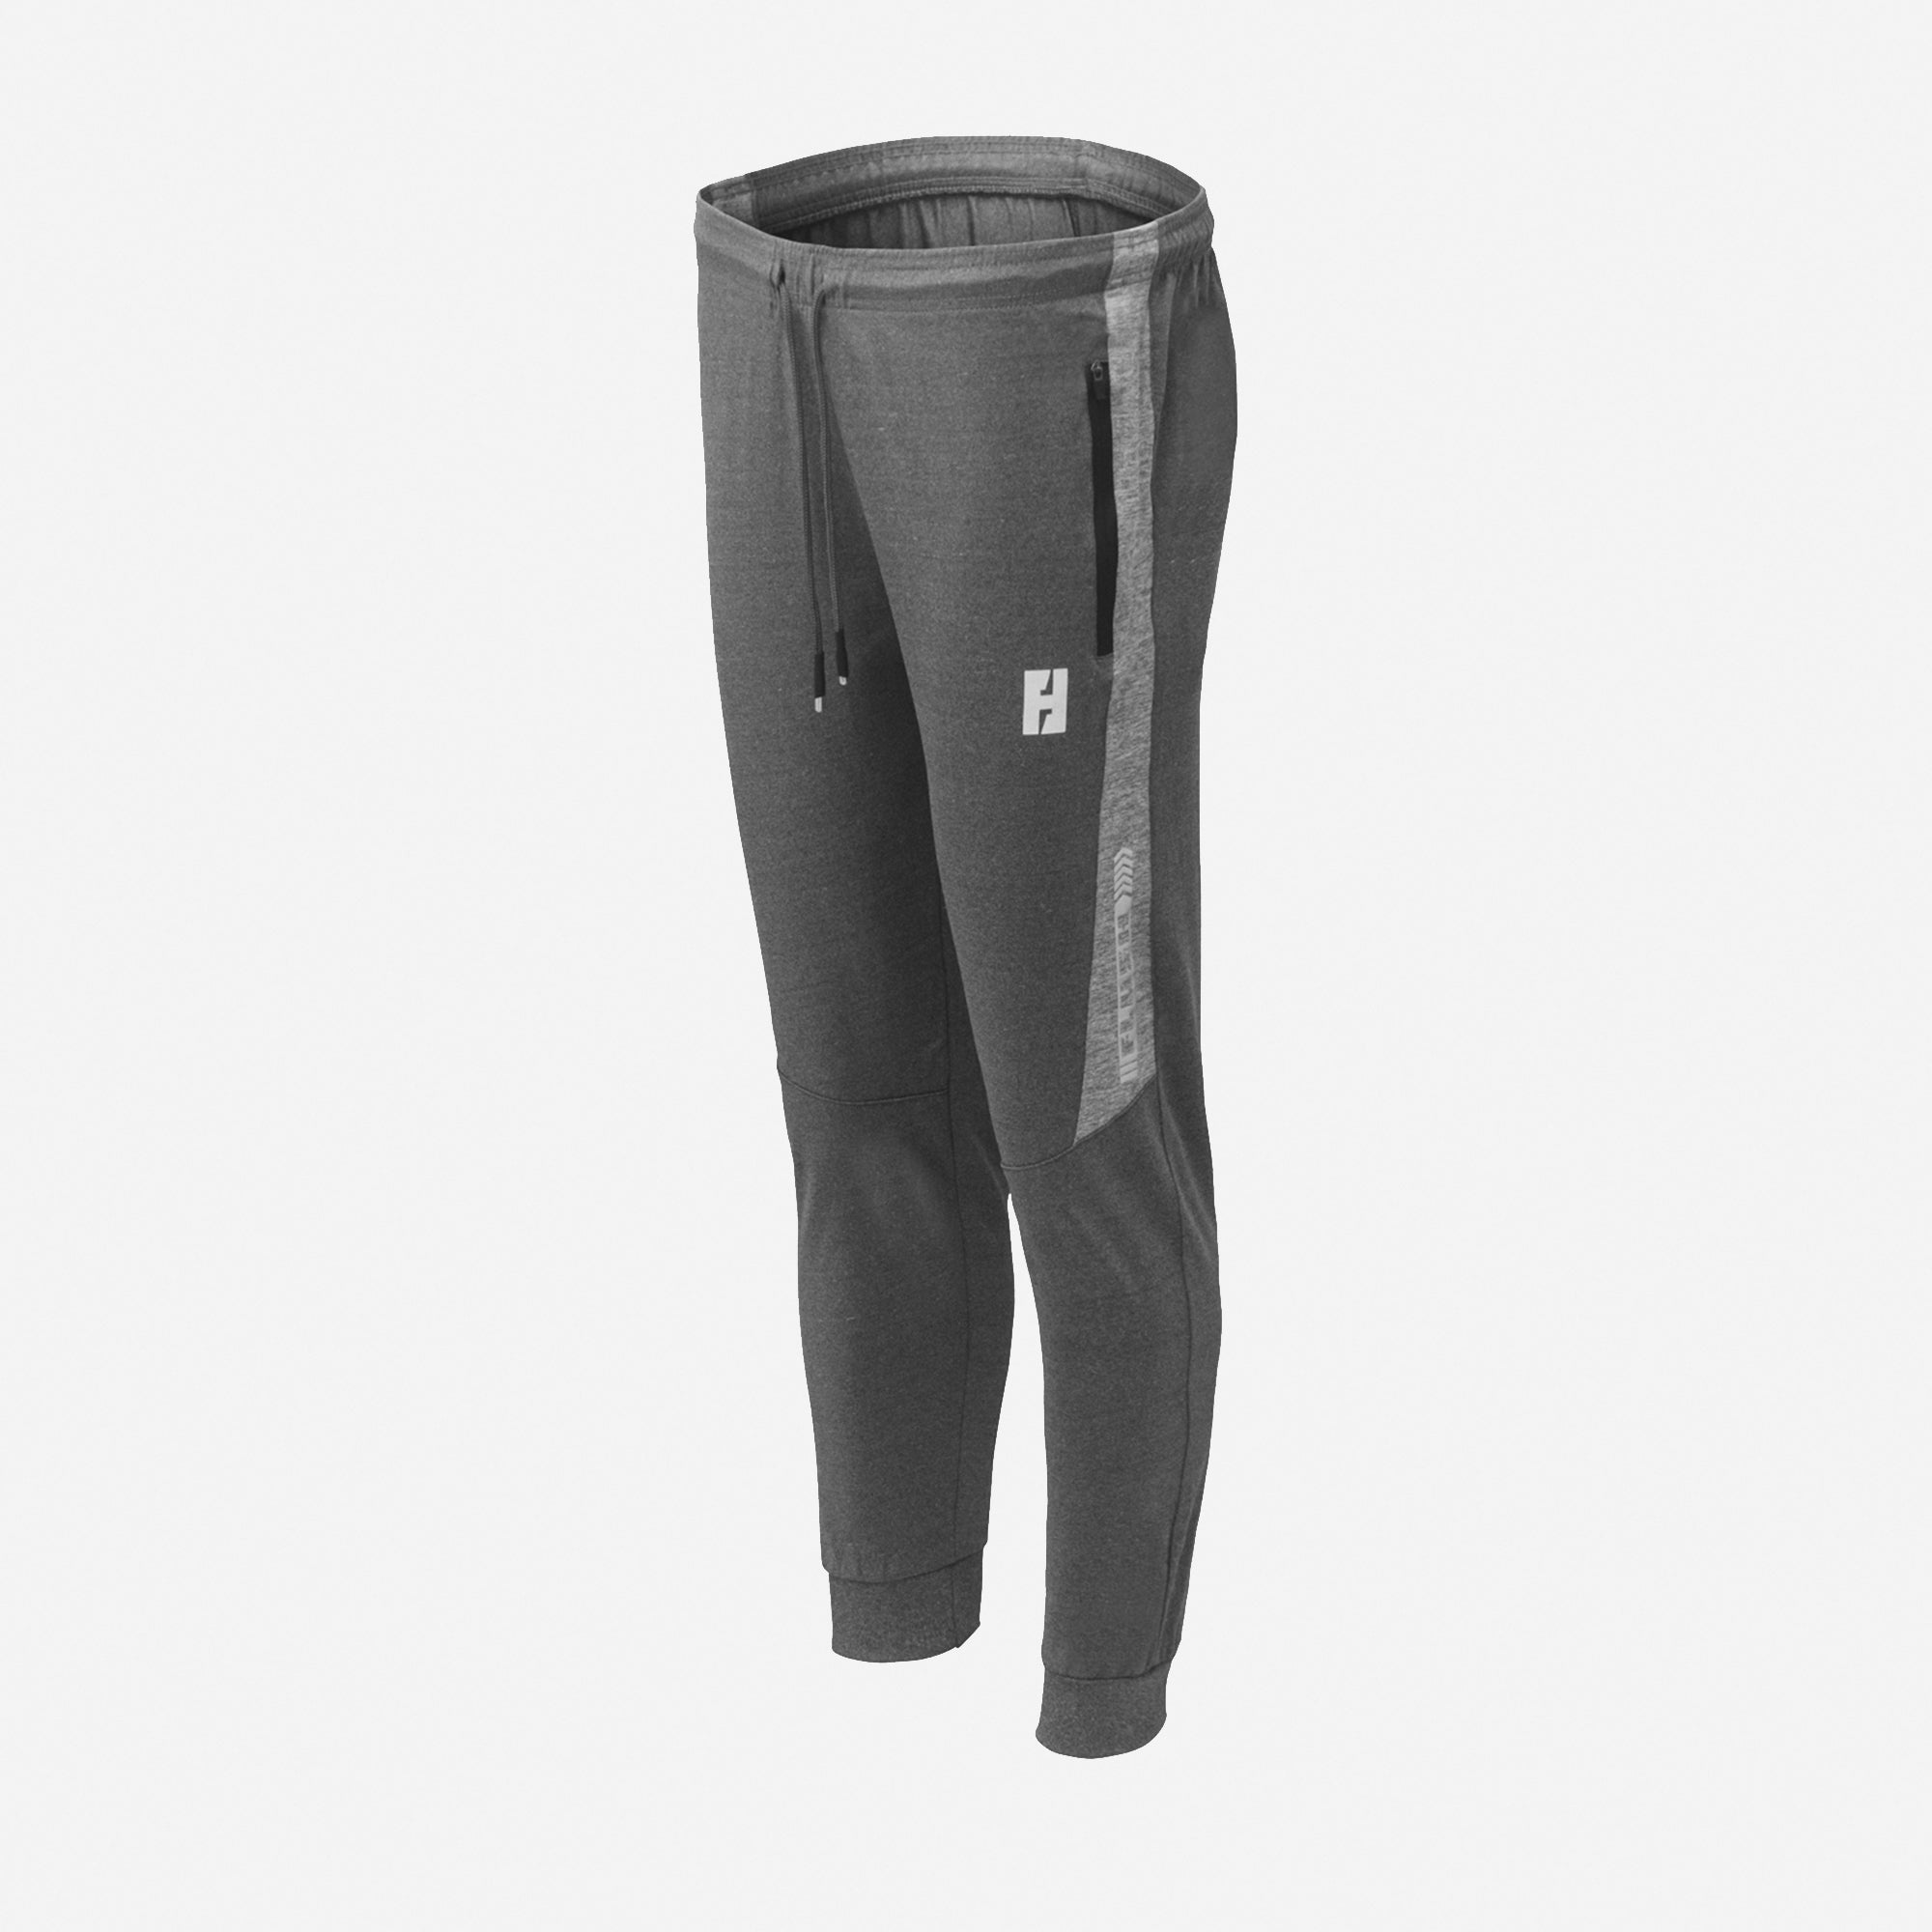 Sports Athletic Running UA Trouser With Secure Zipper